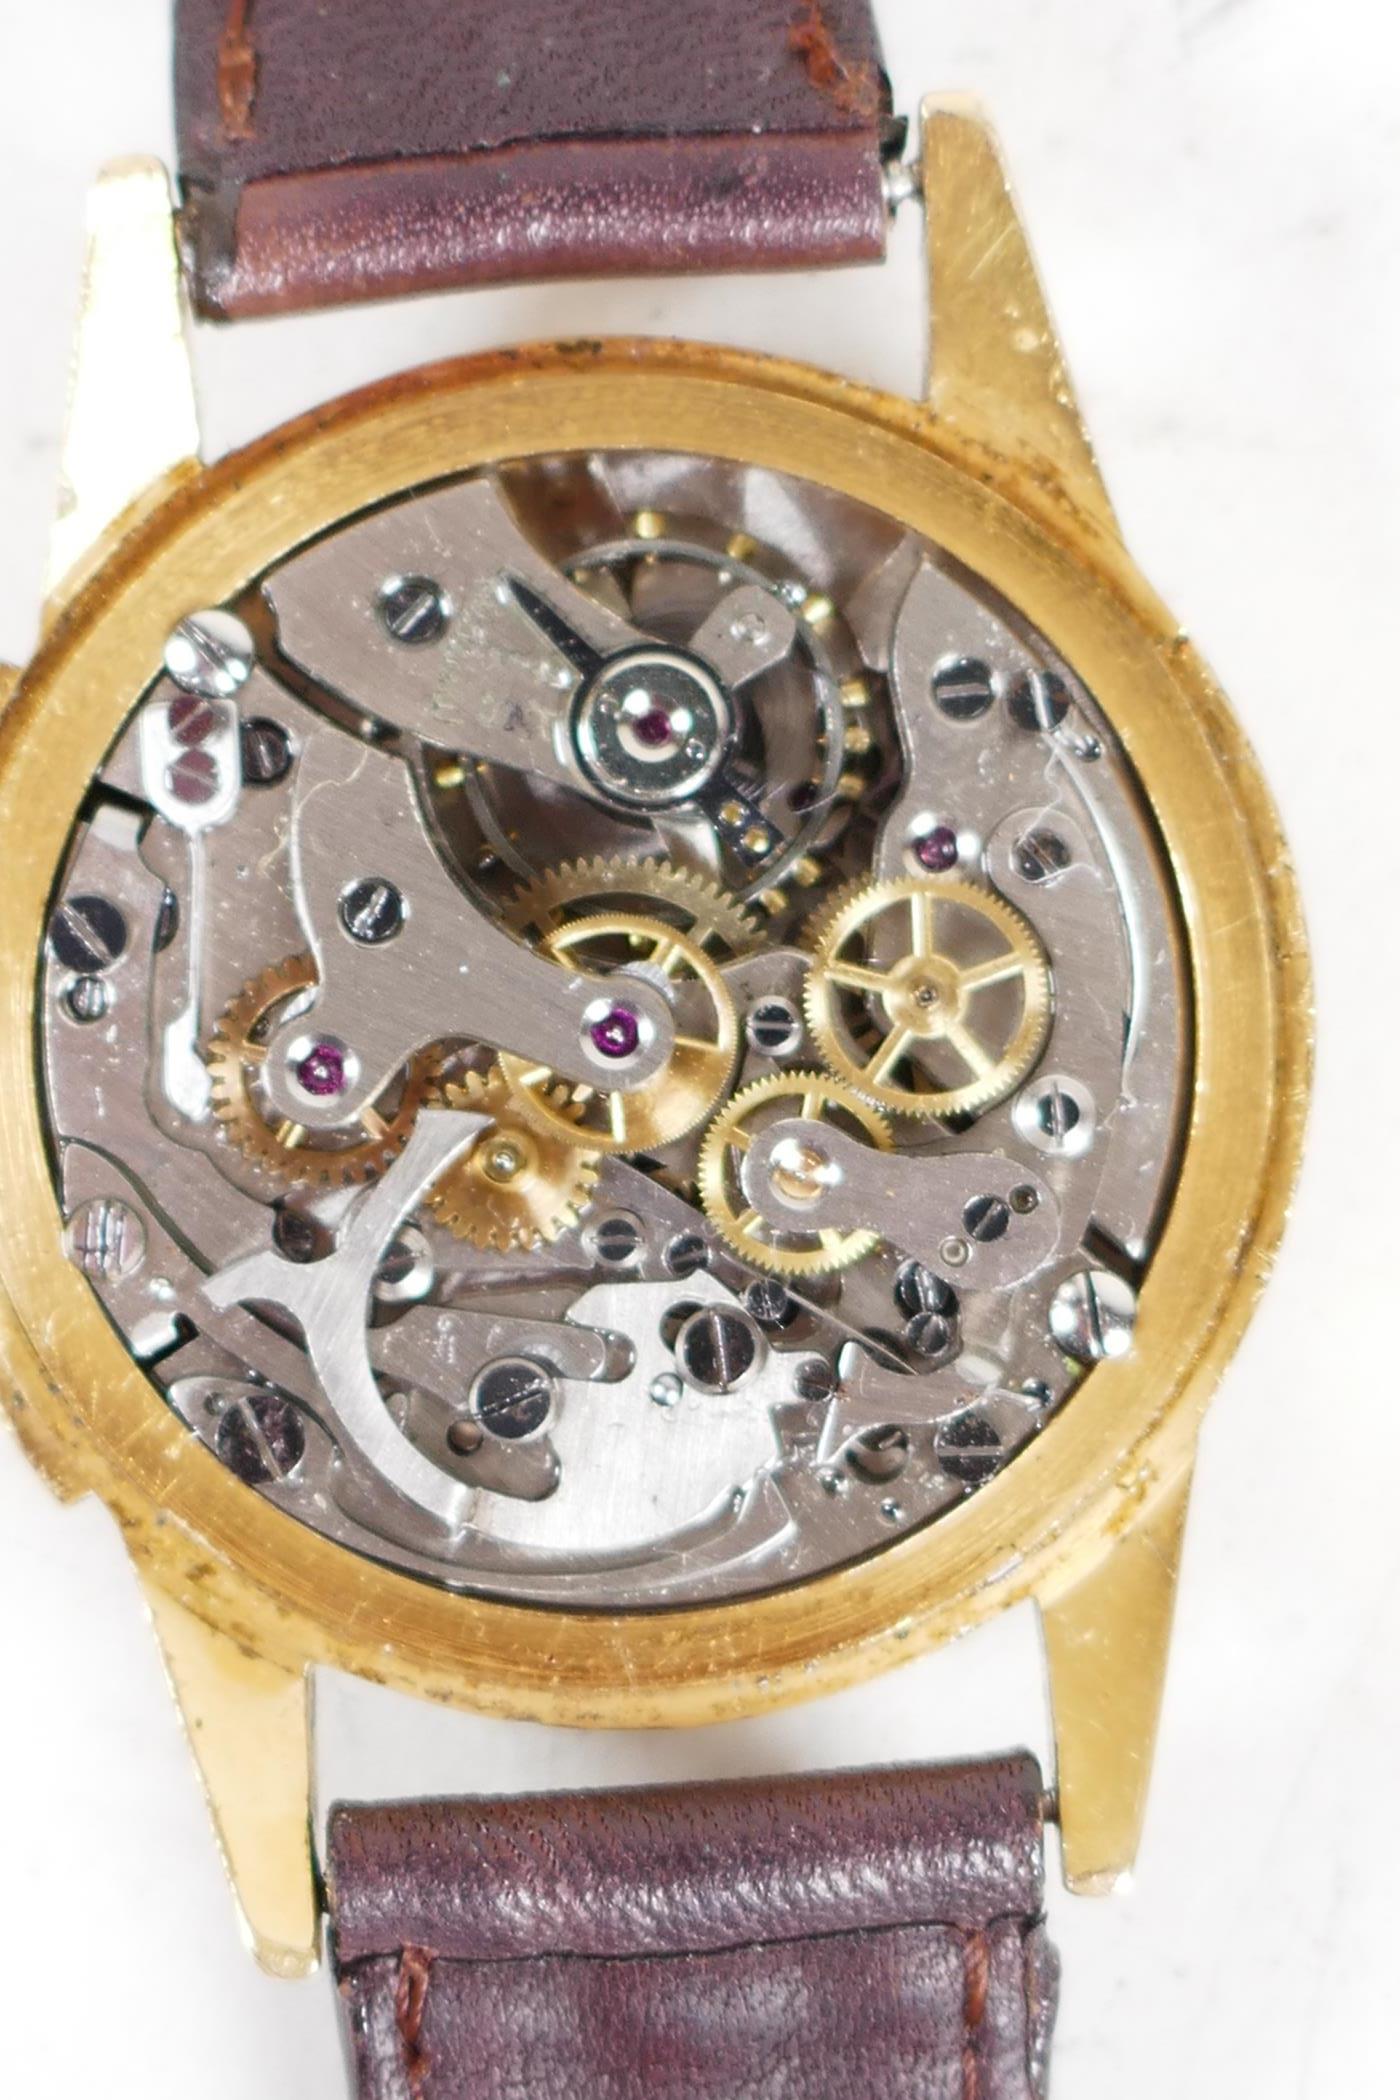 A vintage Swiss made gentleman's wristwatch by Janil, the face with secondary day and seconds dial - Image 3 of 3